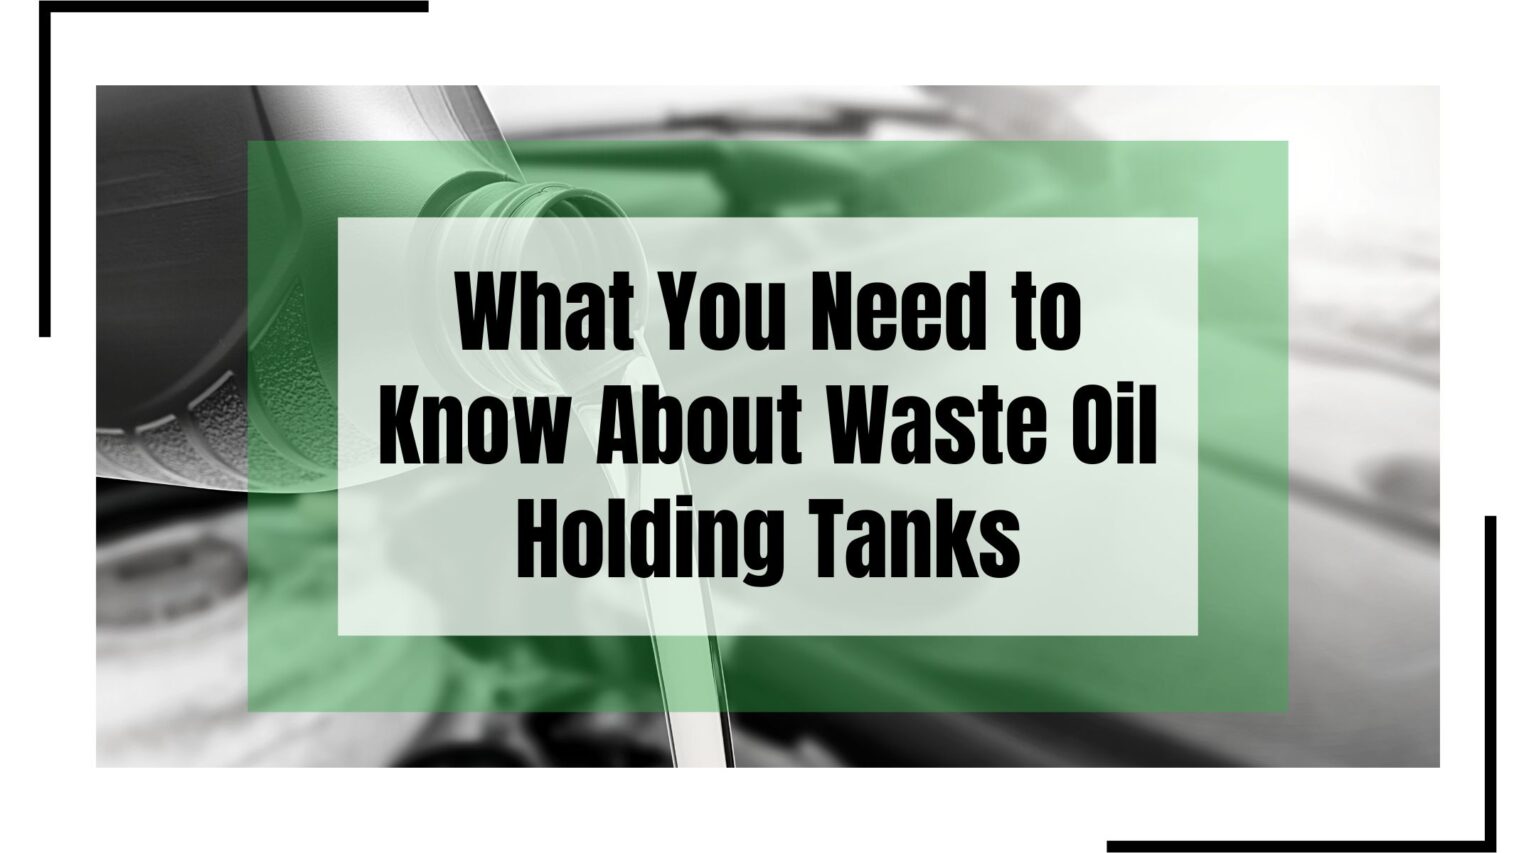 What You Need to Know About Waste Oil Holding Tanks